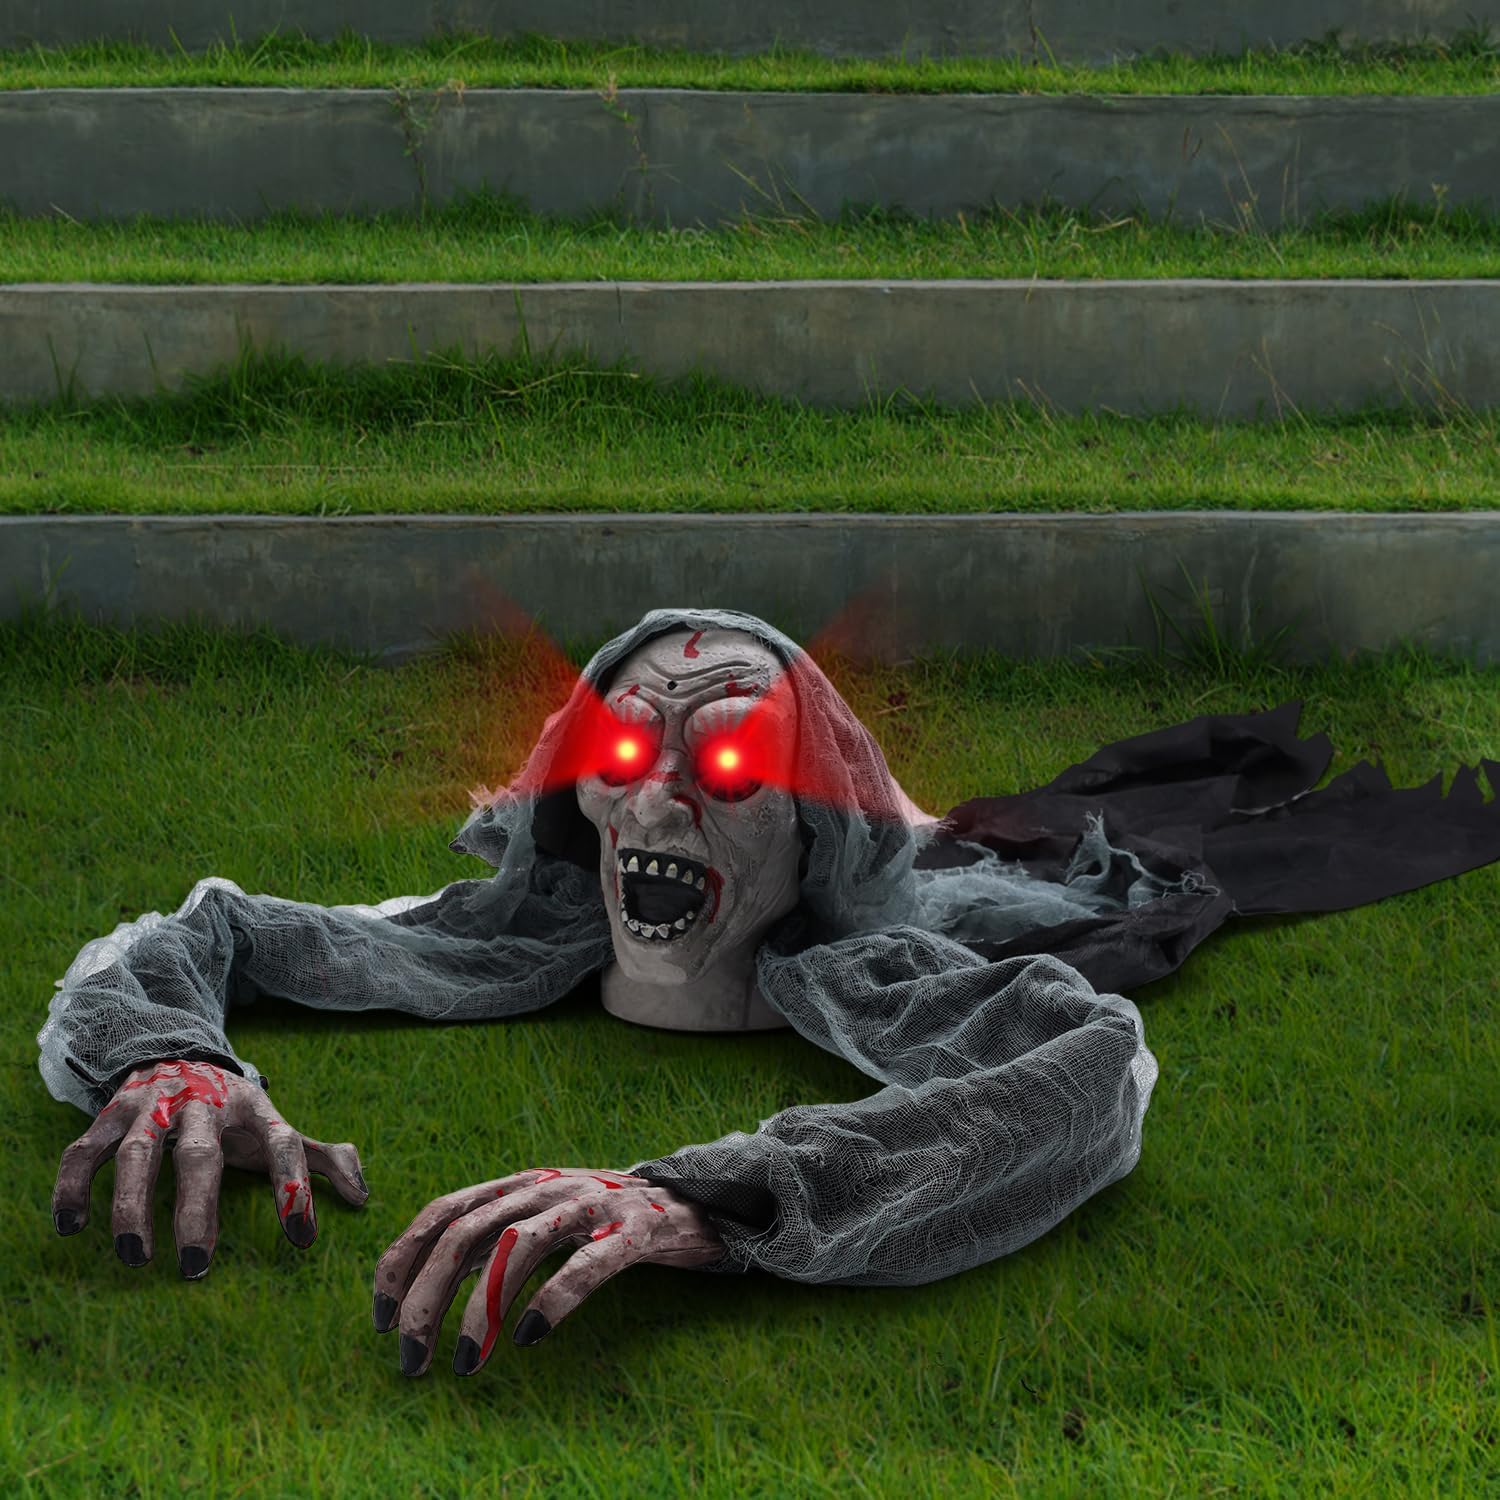 Life-Size Animated Zombie for Lawn Is One of the Best Large Halloween Decorations from Amazon